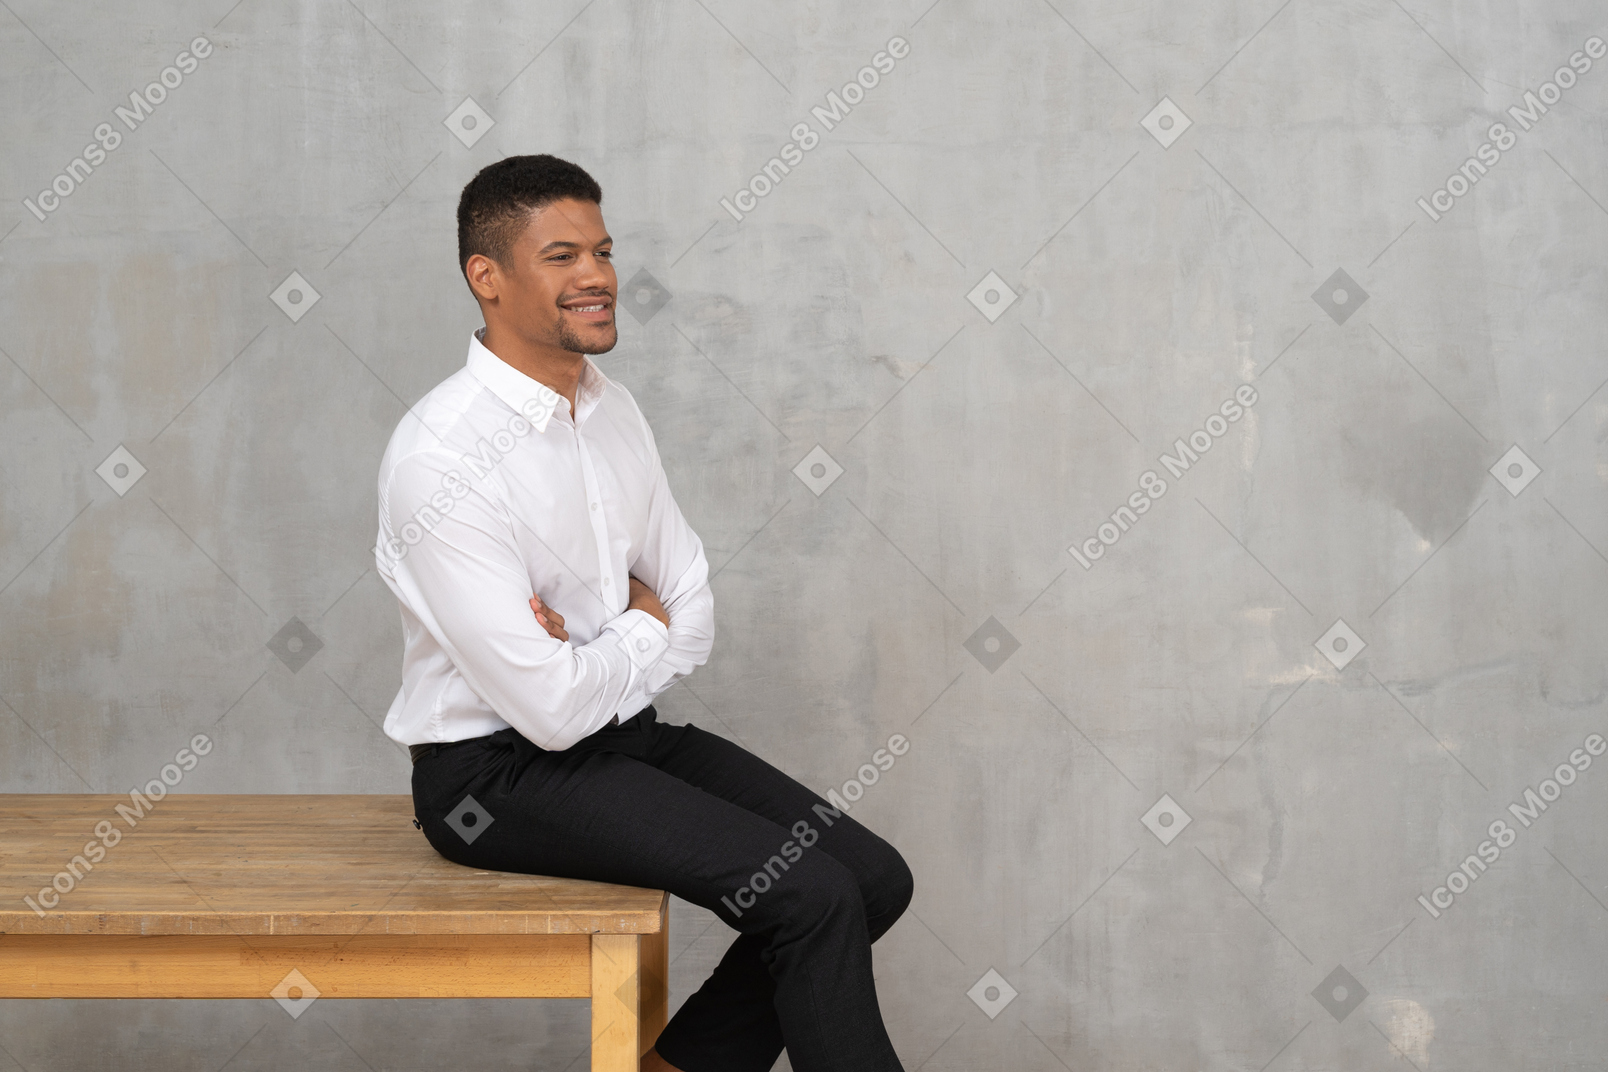 Smiling man in office clothes sitting on a table with his arms crossed